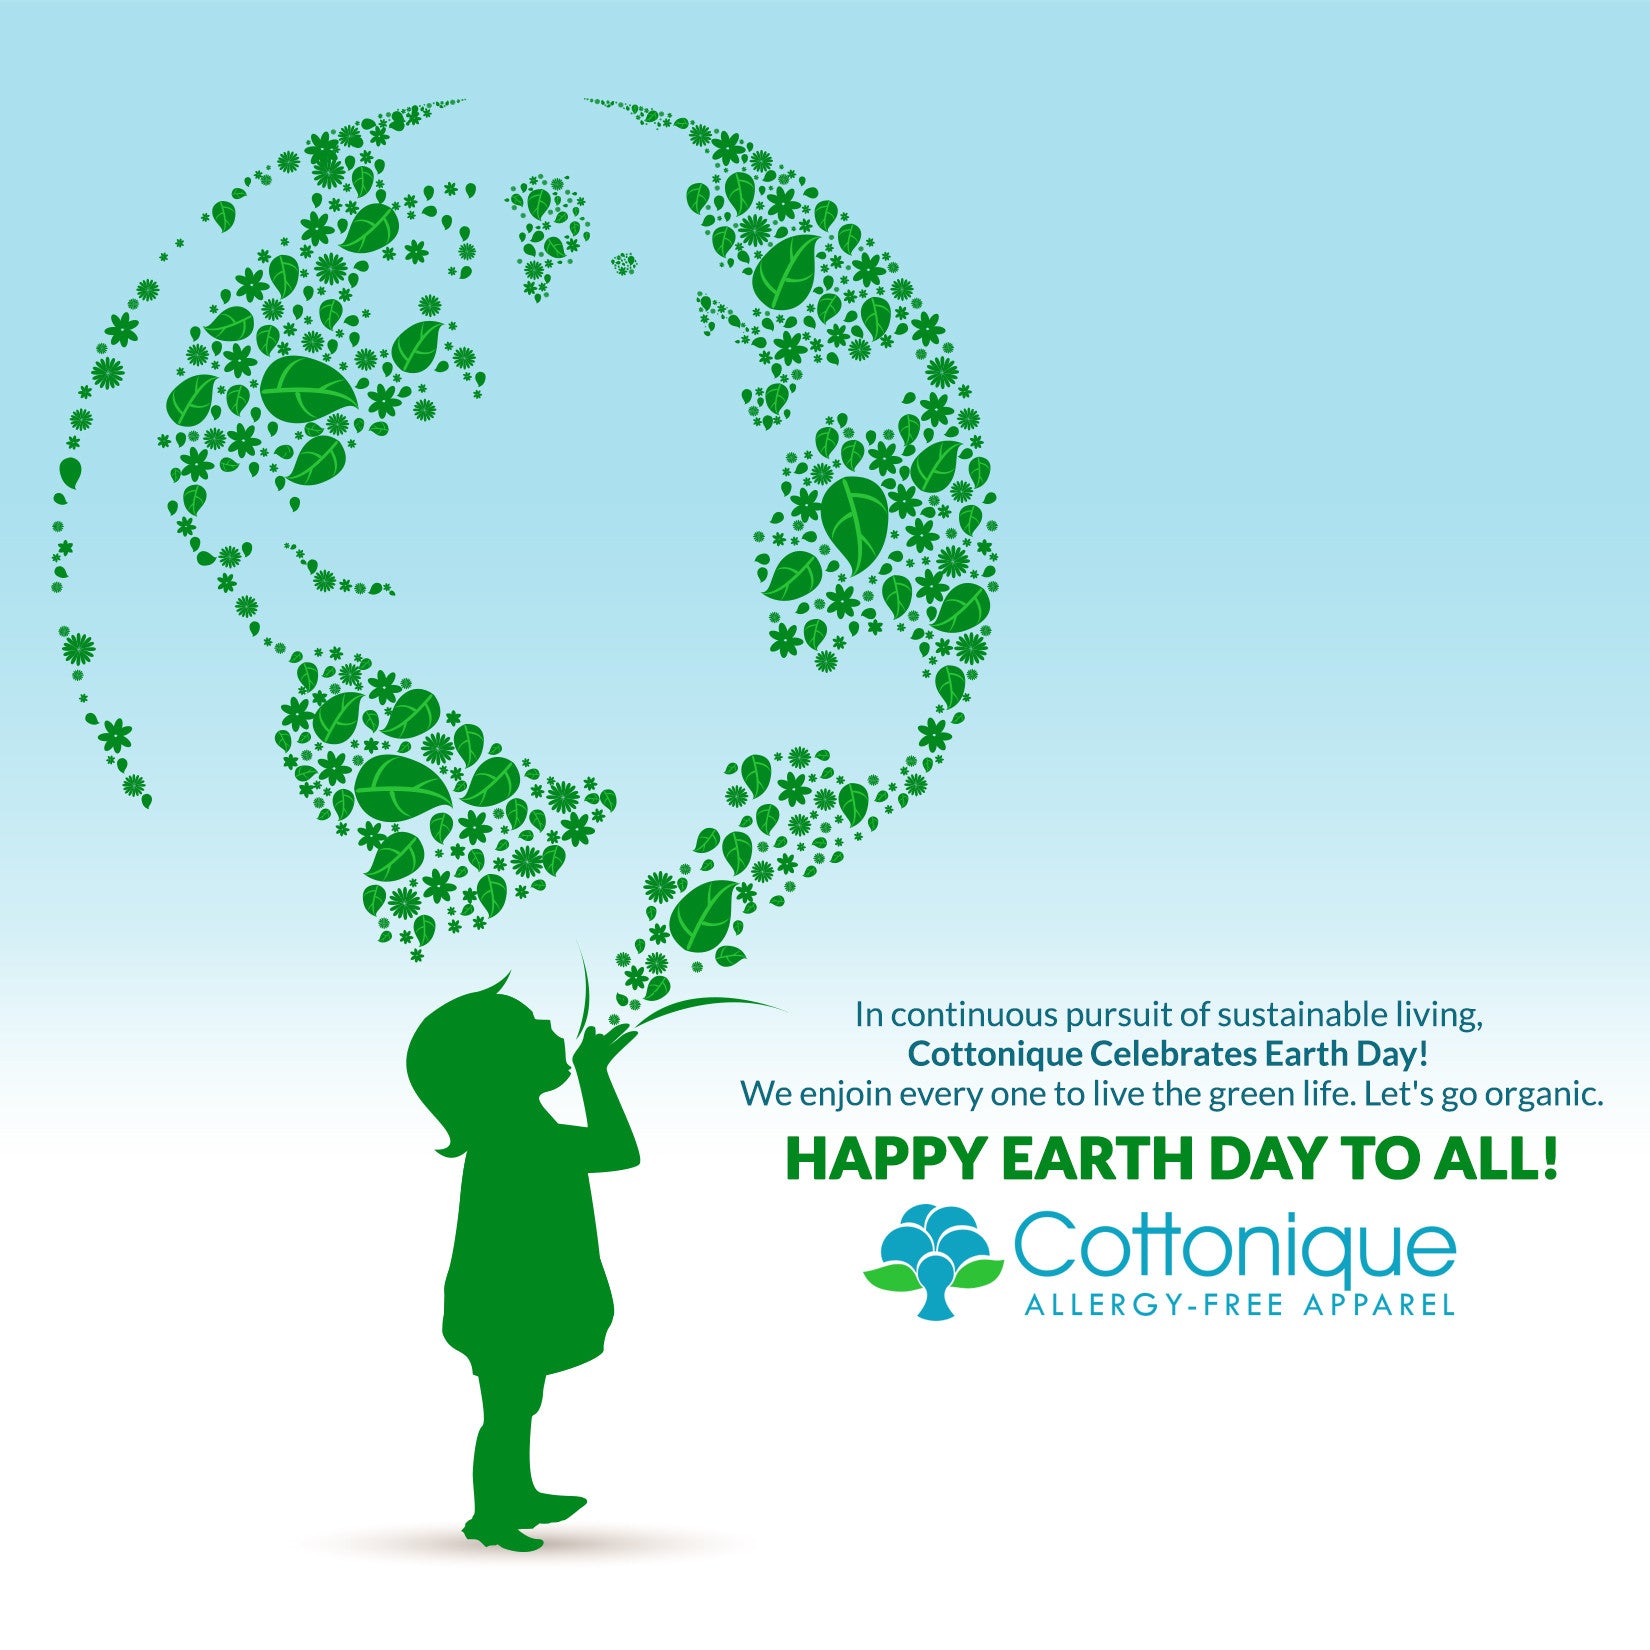 Let's Make Every Day Earth Day!